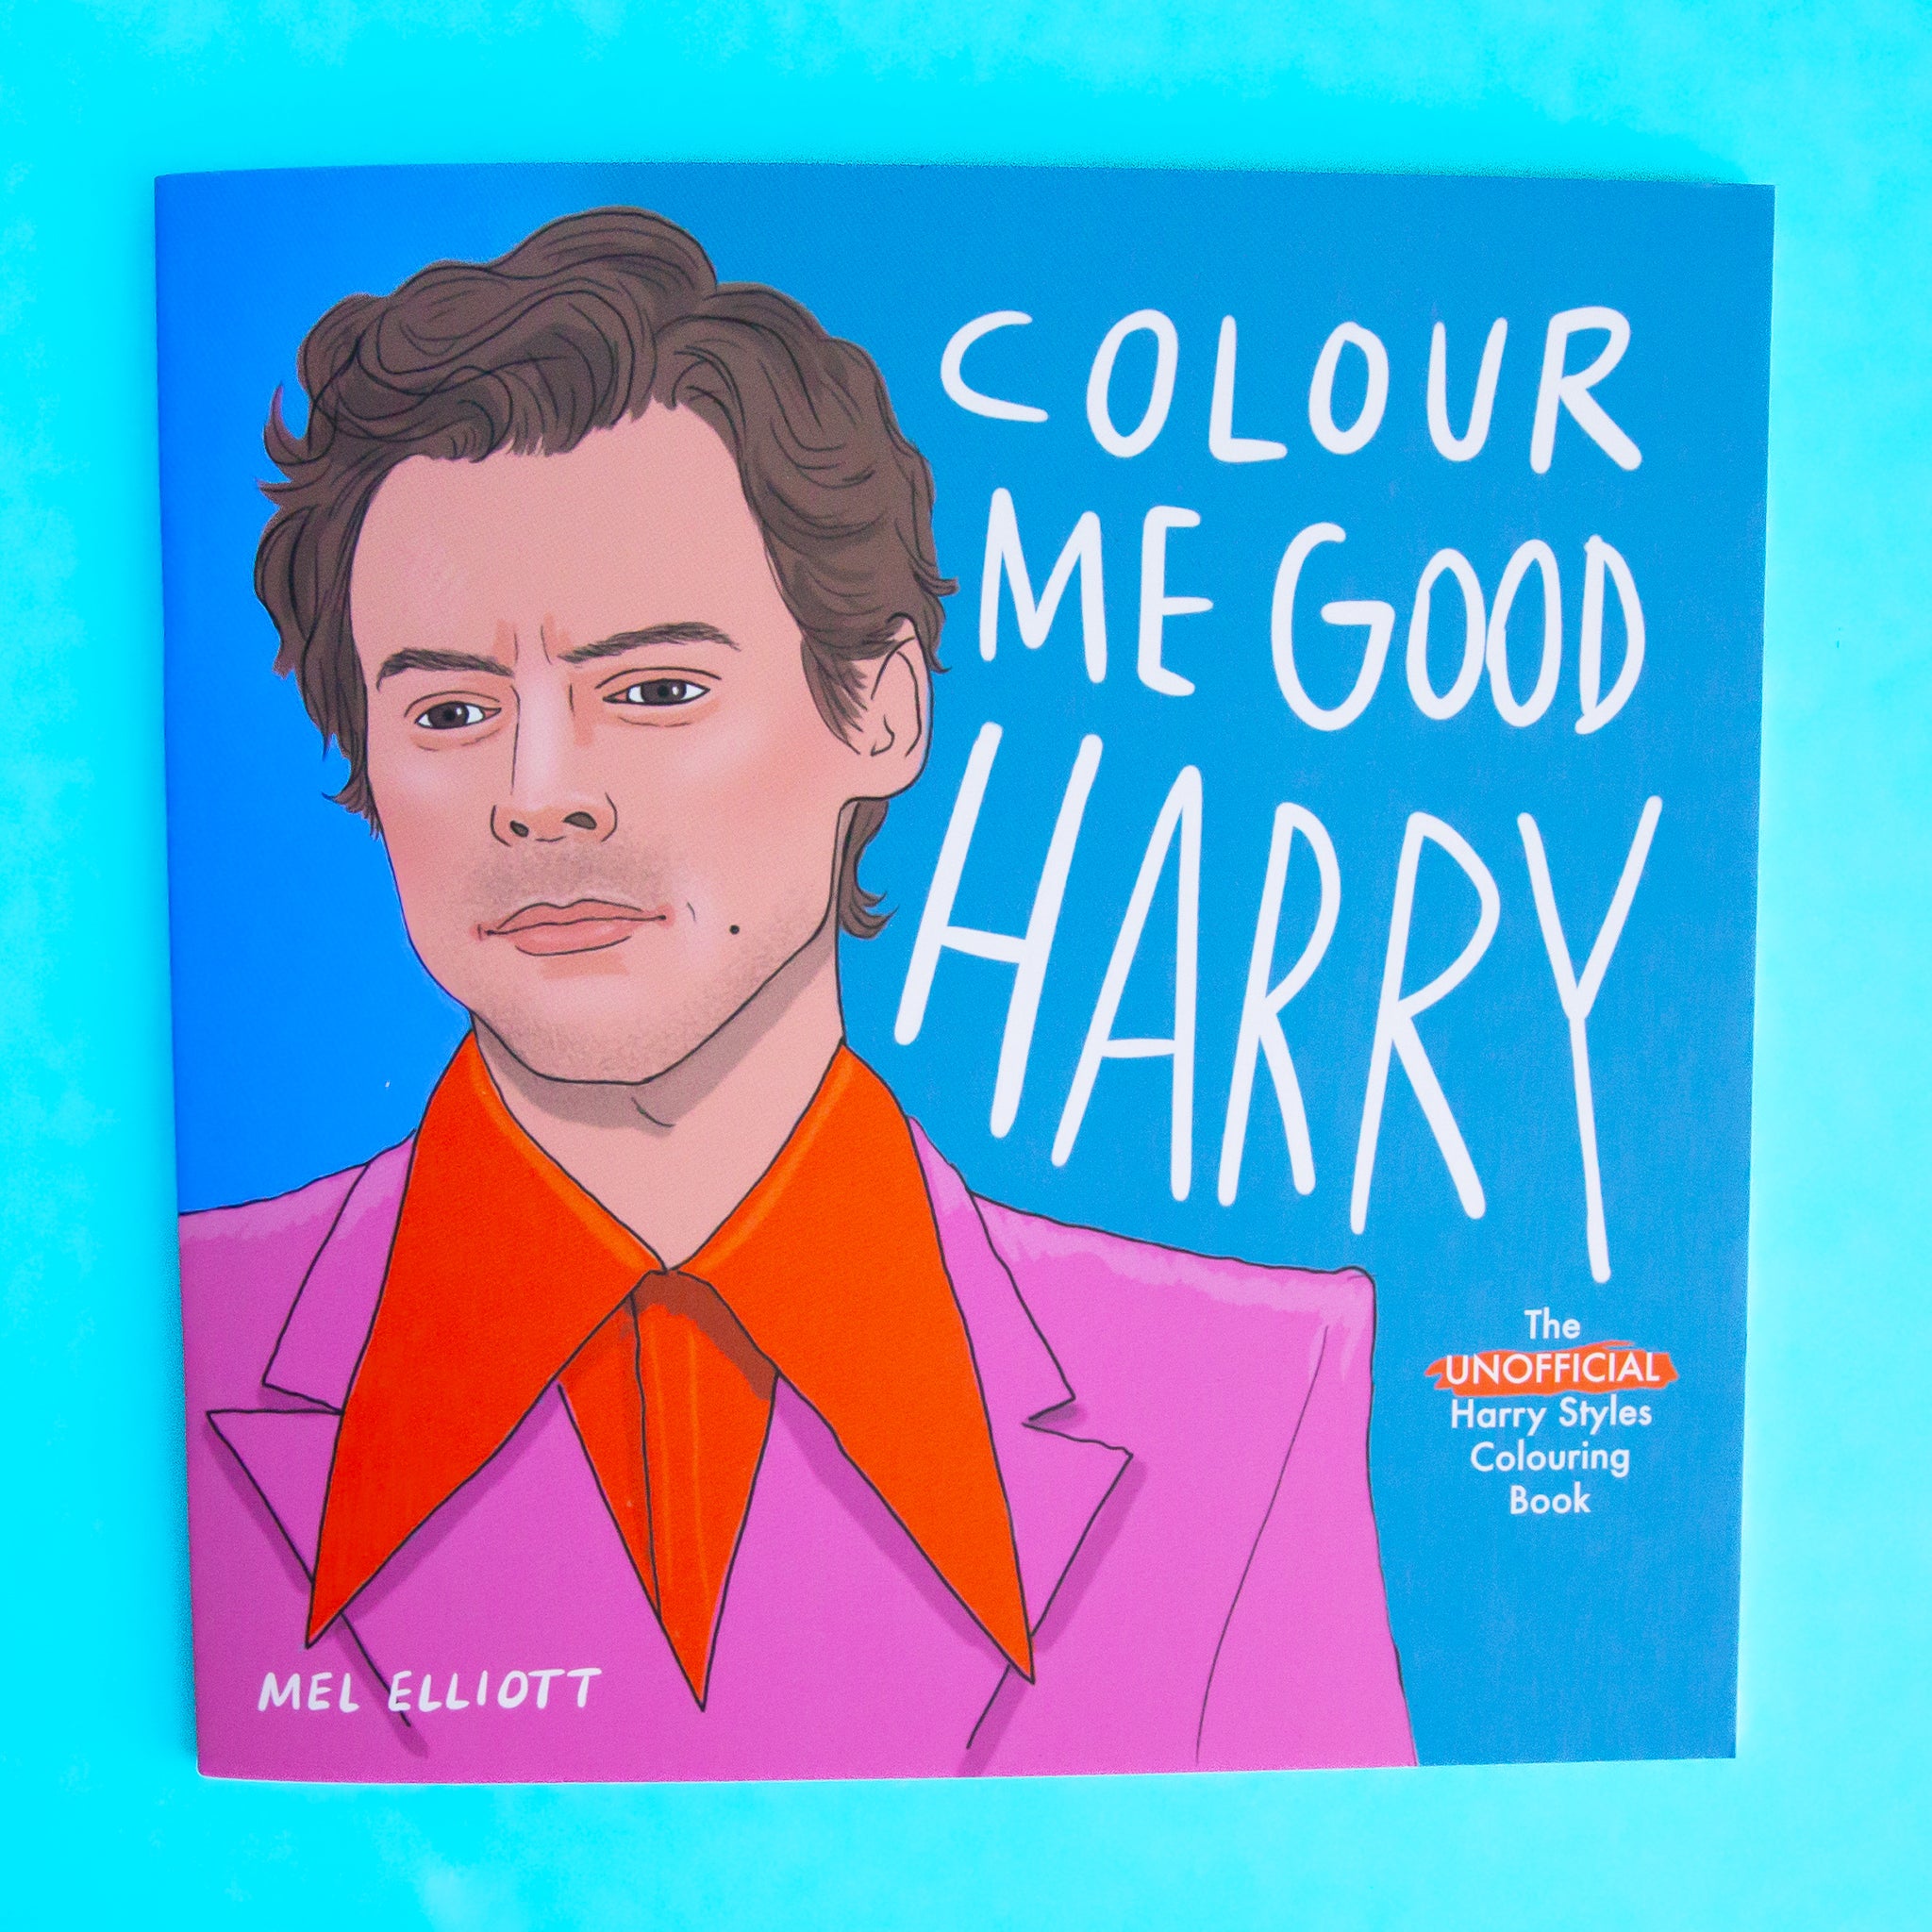 On a blue background is a blue coloring book cover with an illustration of Harry Styles and text that reads, "Colour Me Good Harry".